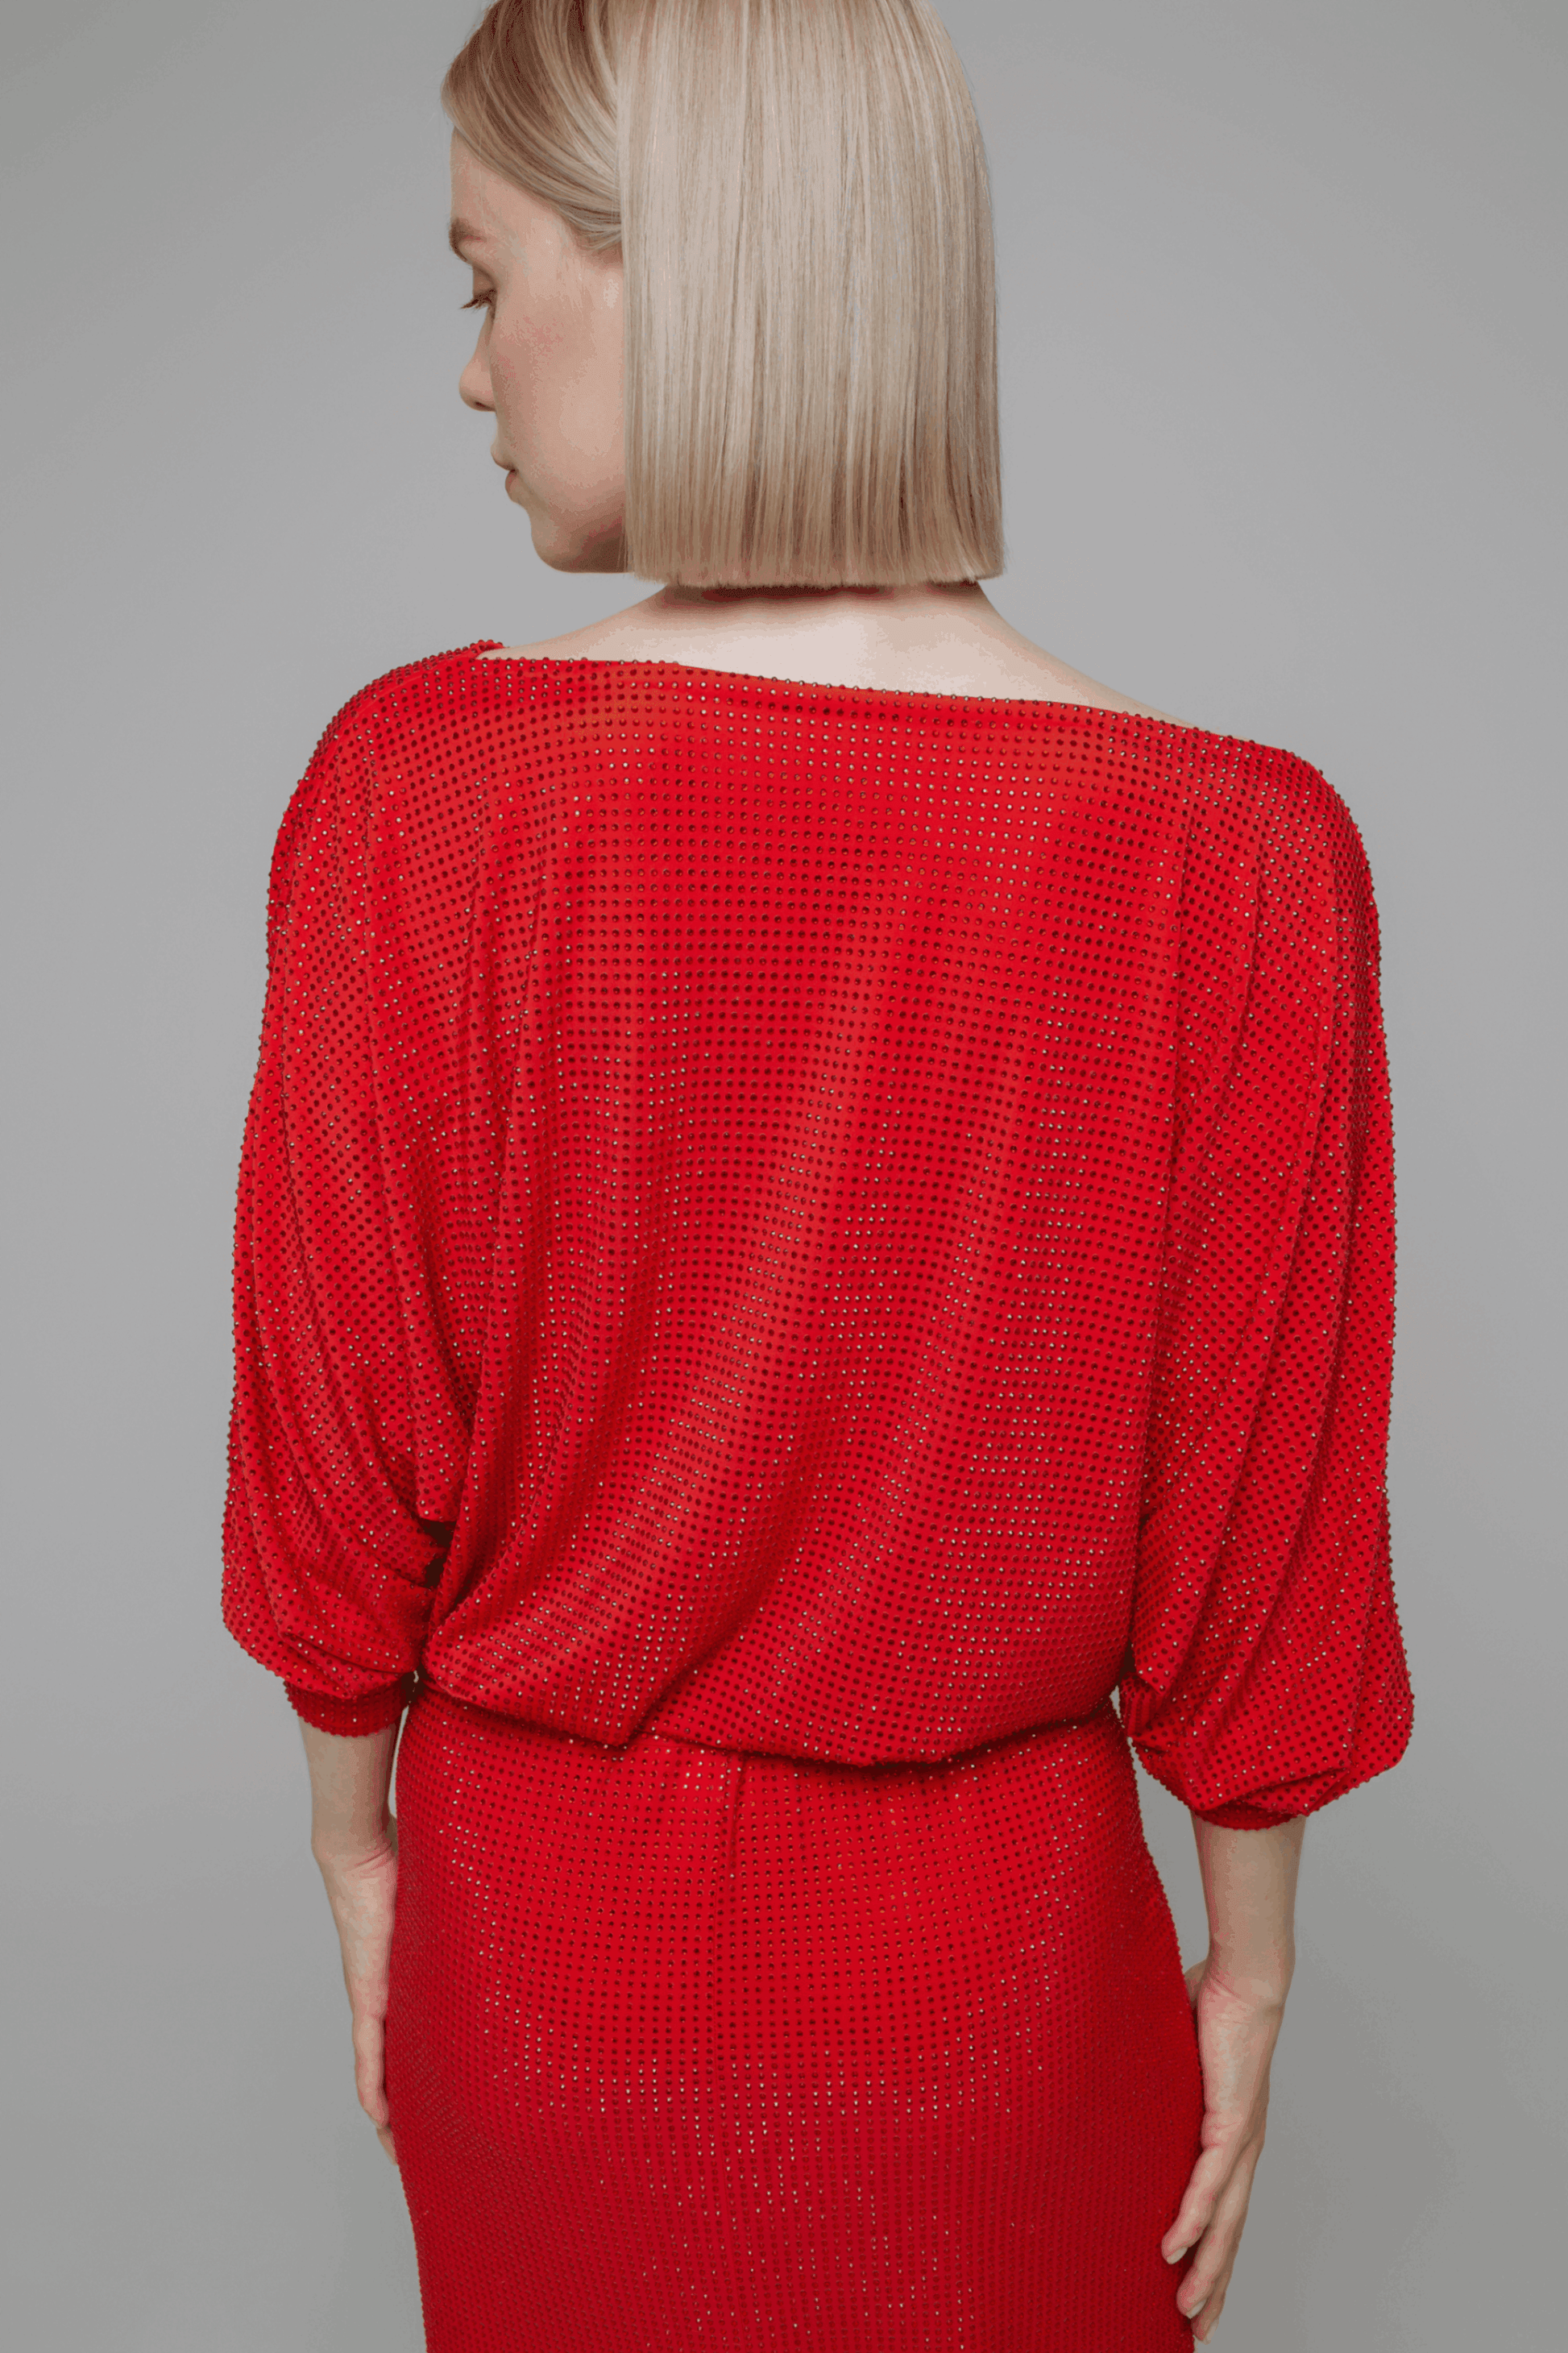 Exquisite detail of Crystal Cowlneck Three Quarter Dolman Sleeves showcasing the fine craftsmanship and elegant design characteristic of Axinia Collection 's luxury collection.